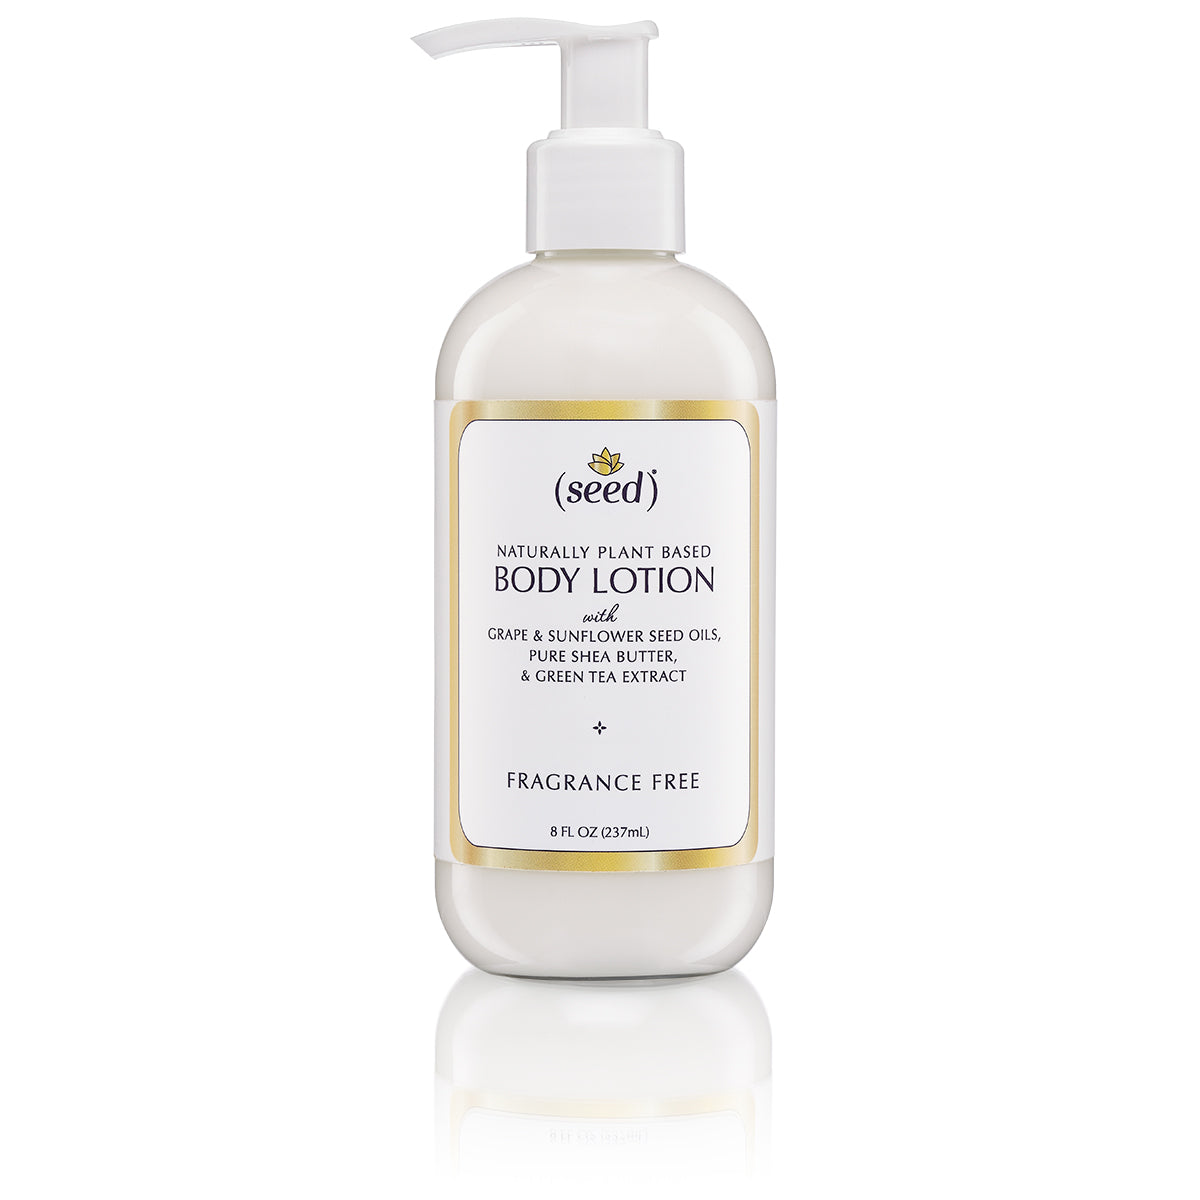 Seed Fragrance Free Body Lotion with Grape and Sunflower Seed Oils, Shea Butter and Green Tea Extract